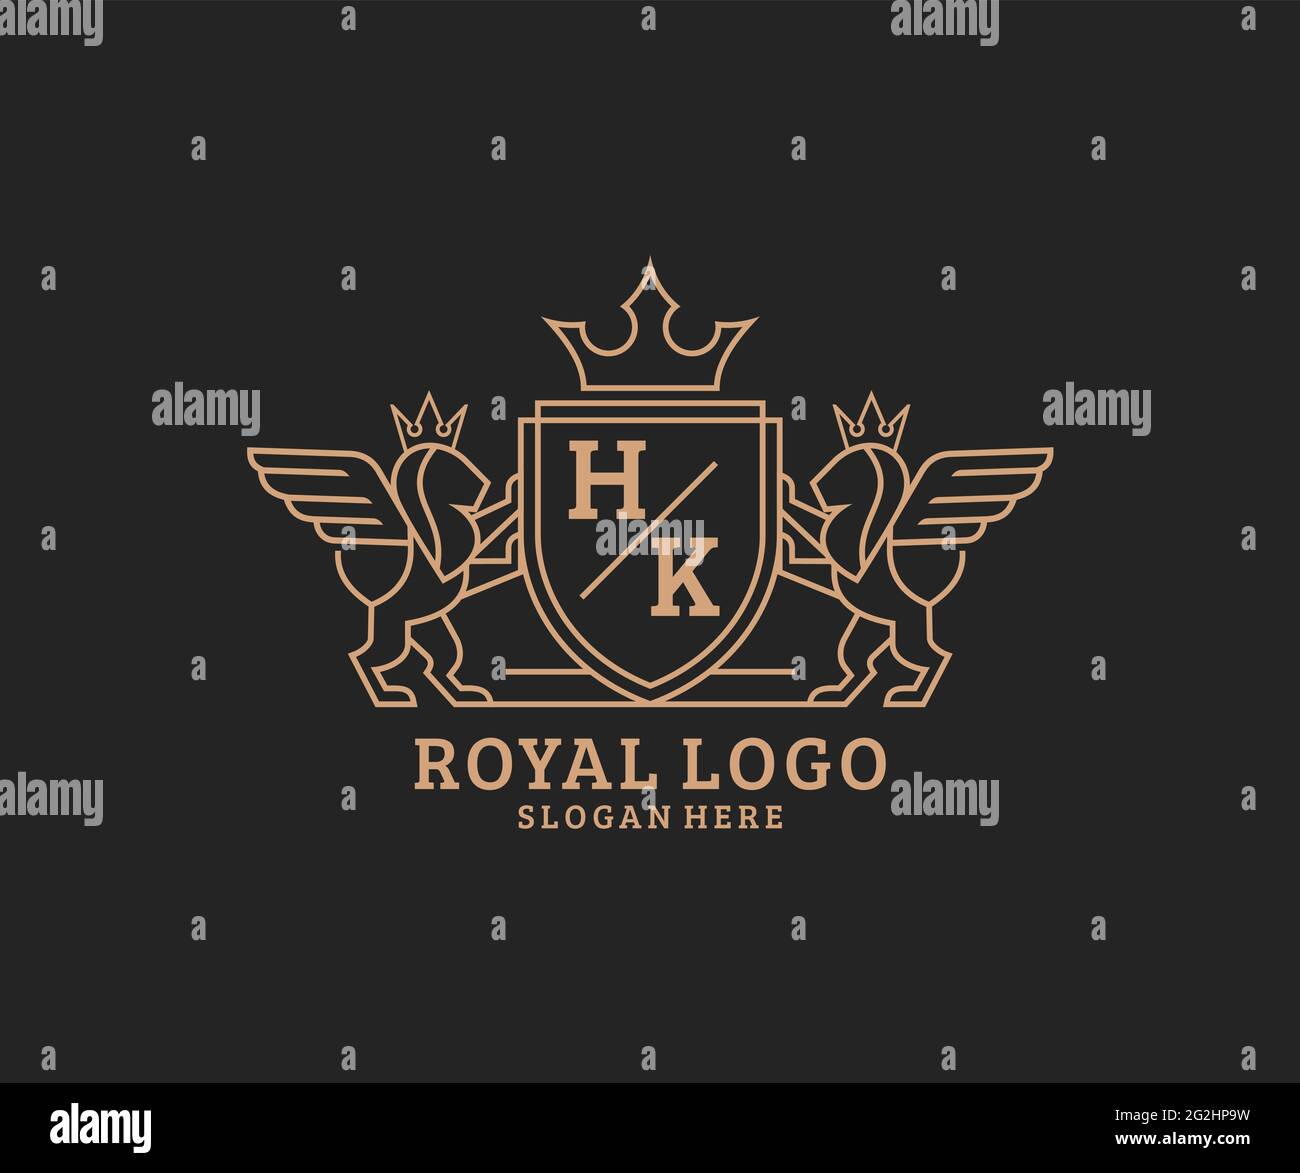 HK Letter Lion Royal Luxury Heraldic,Crest Logo template in vector art for Restaurant, Royalty, Boutique, Cafe, Hotel, Heraldic, Jewelry, Fashion and Stock Vector